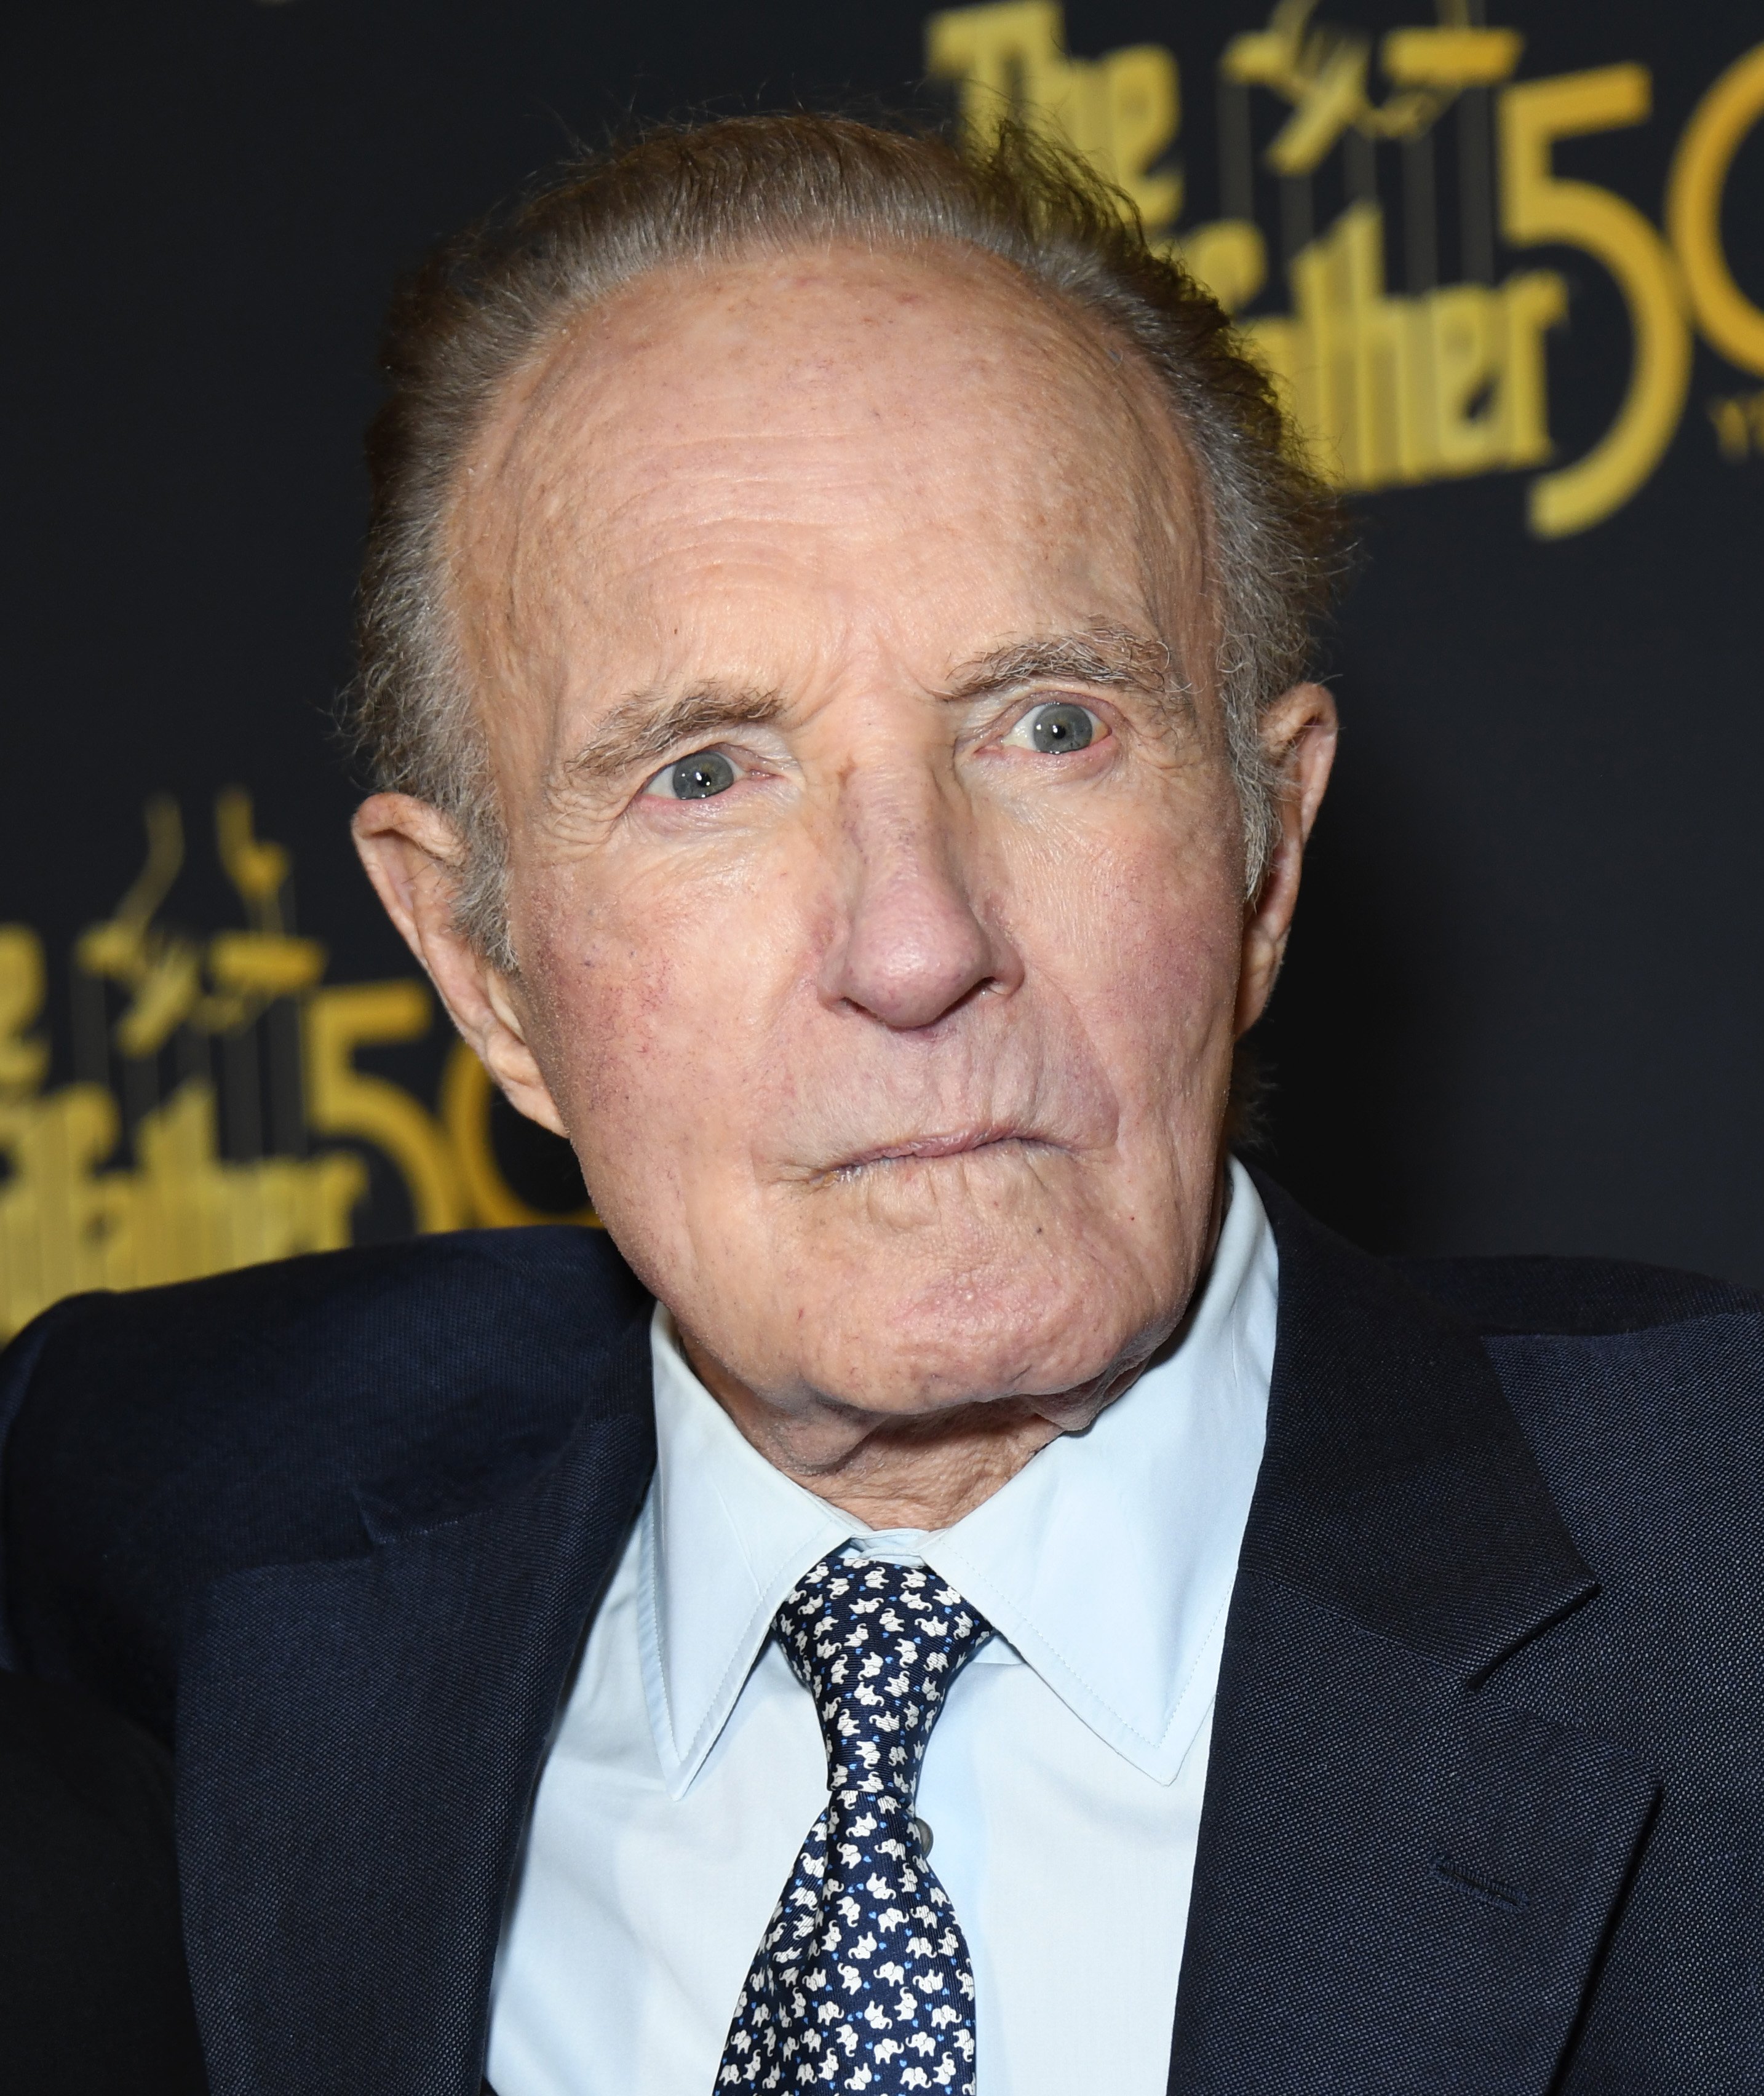 James Caan during "The Godfather" 50th Anniversary Celebration at Paramount Theatre on February 22, 2022 in Los Angeles, California. / Source: Getty Images